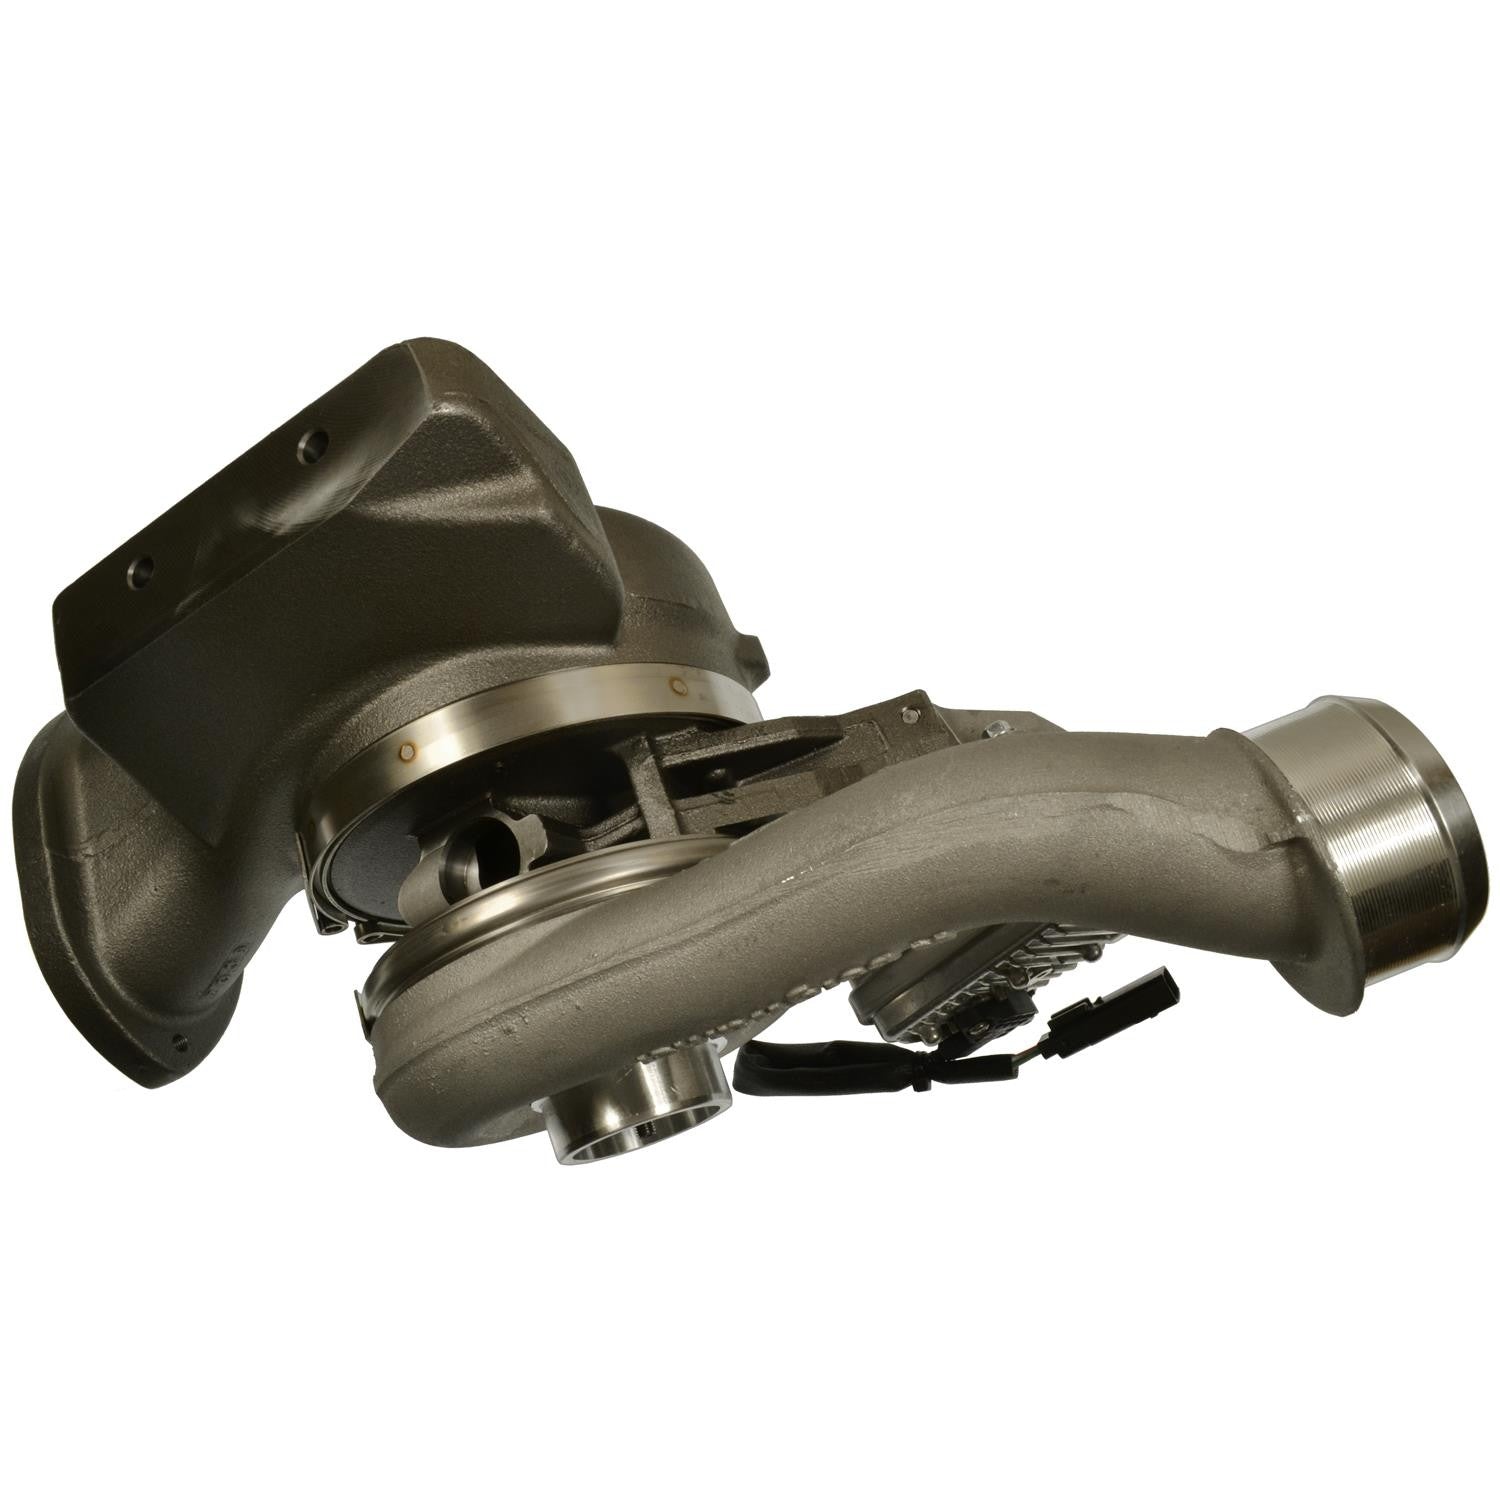 Standard TBC664  Turbocharger for Ford F-250 Super Duty F-350 Super Duty F-450 Super Duty F-550 Super Duty V8 6.4L